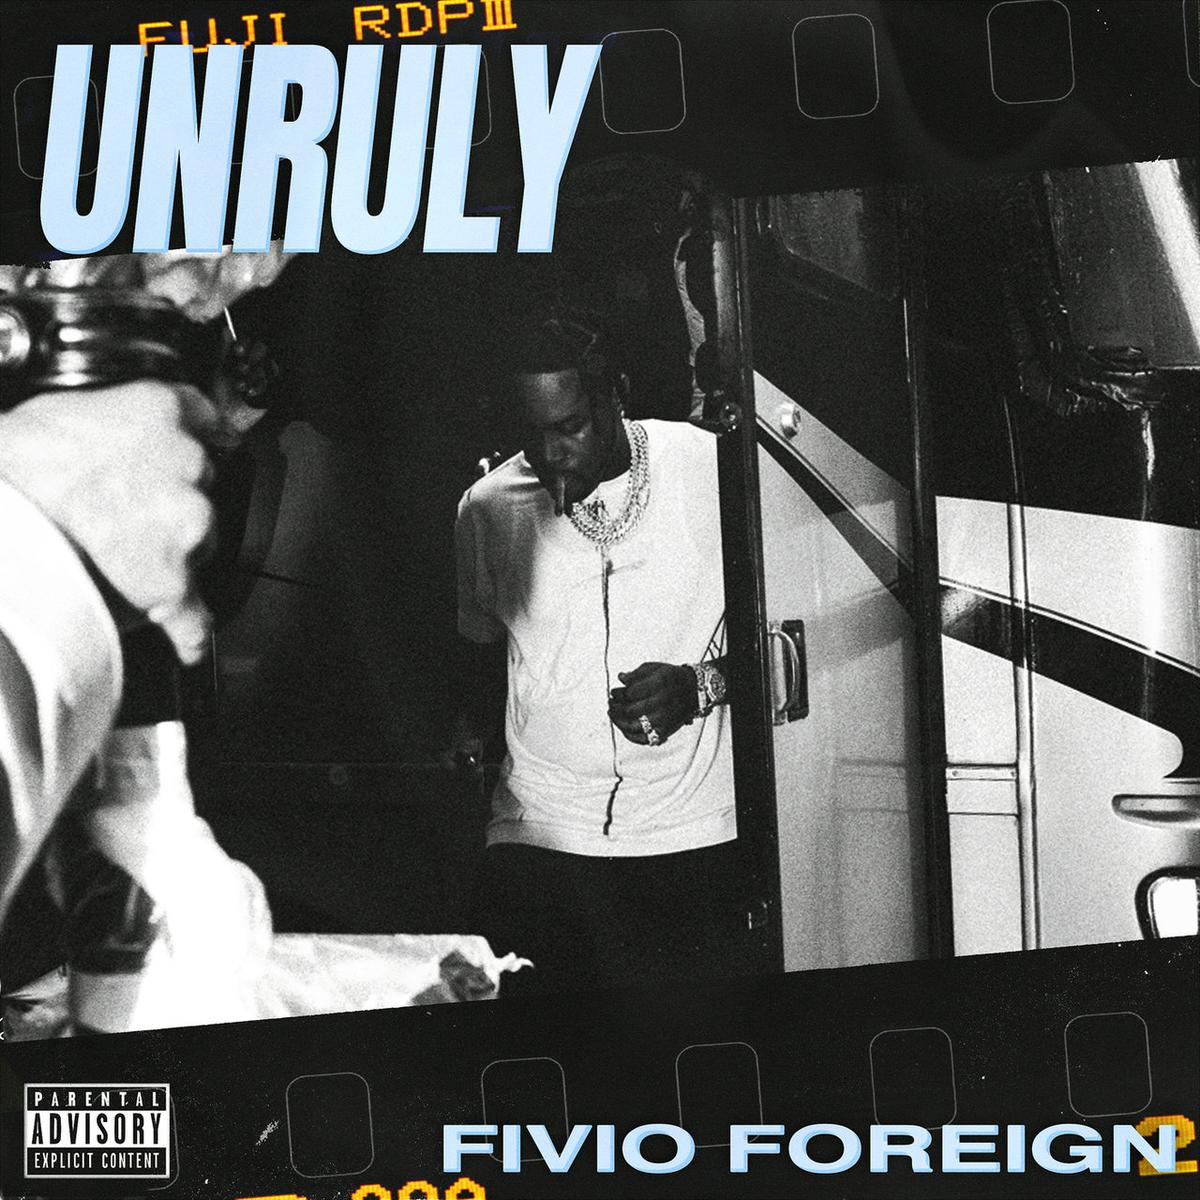 Fivio Foreign Drops “Unruly” In The Midst Of His Legal Issues